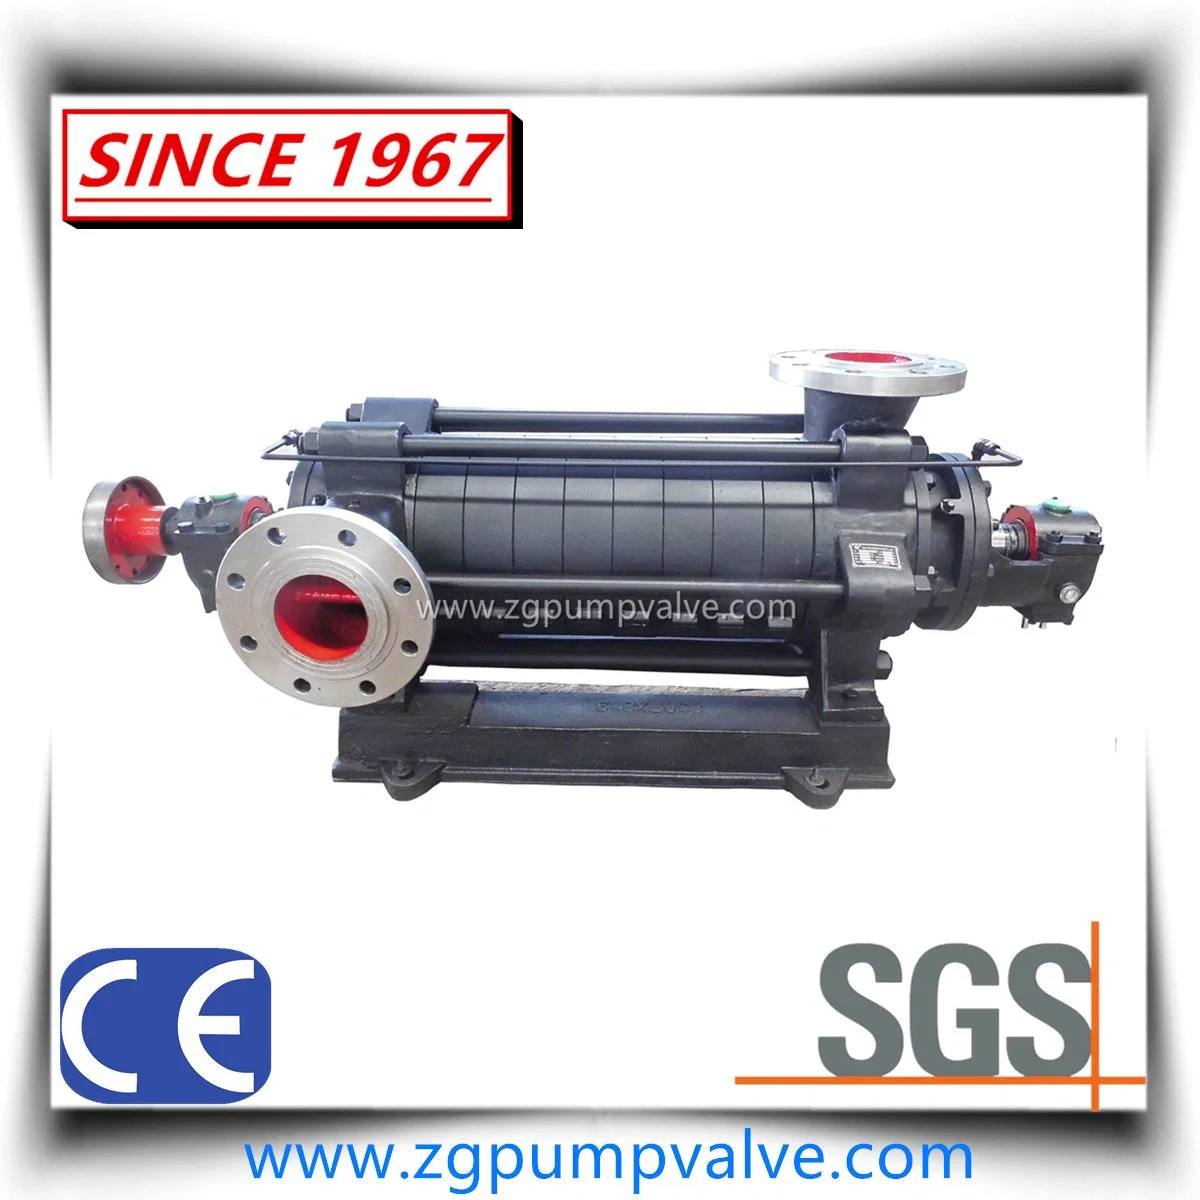 China Horizontal Self-Balanced High Pressure Chemical Water Multistage Centrifugal Pump, Boiler Feed Pump, Duplex Stainless Steel Multi-Stage Pump for Sea Water